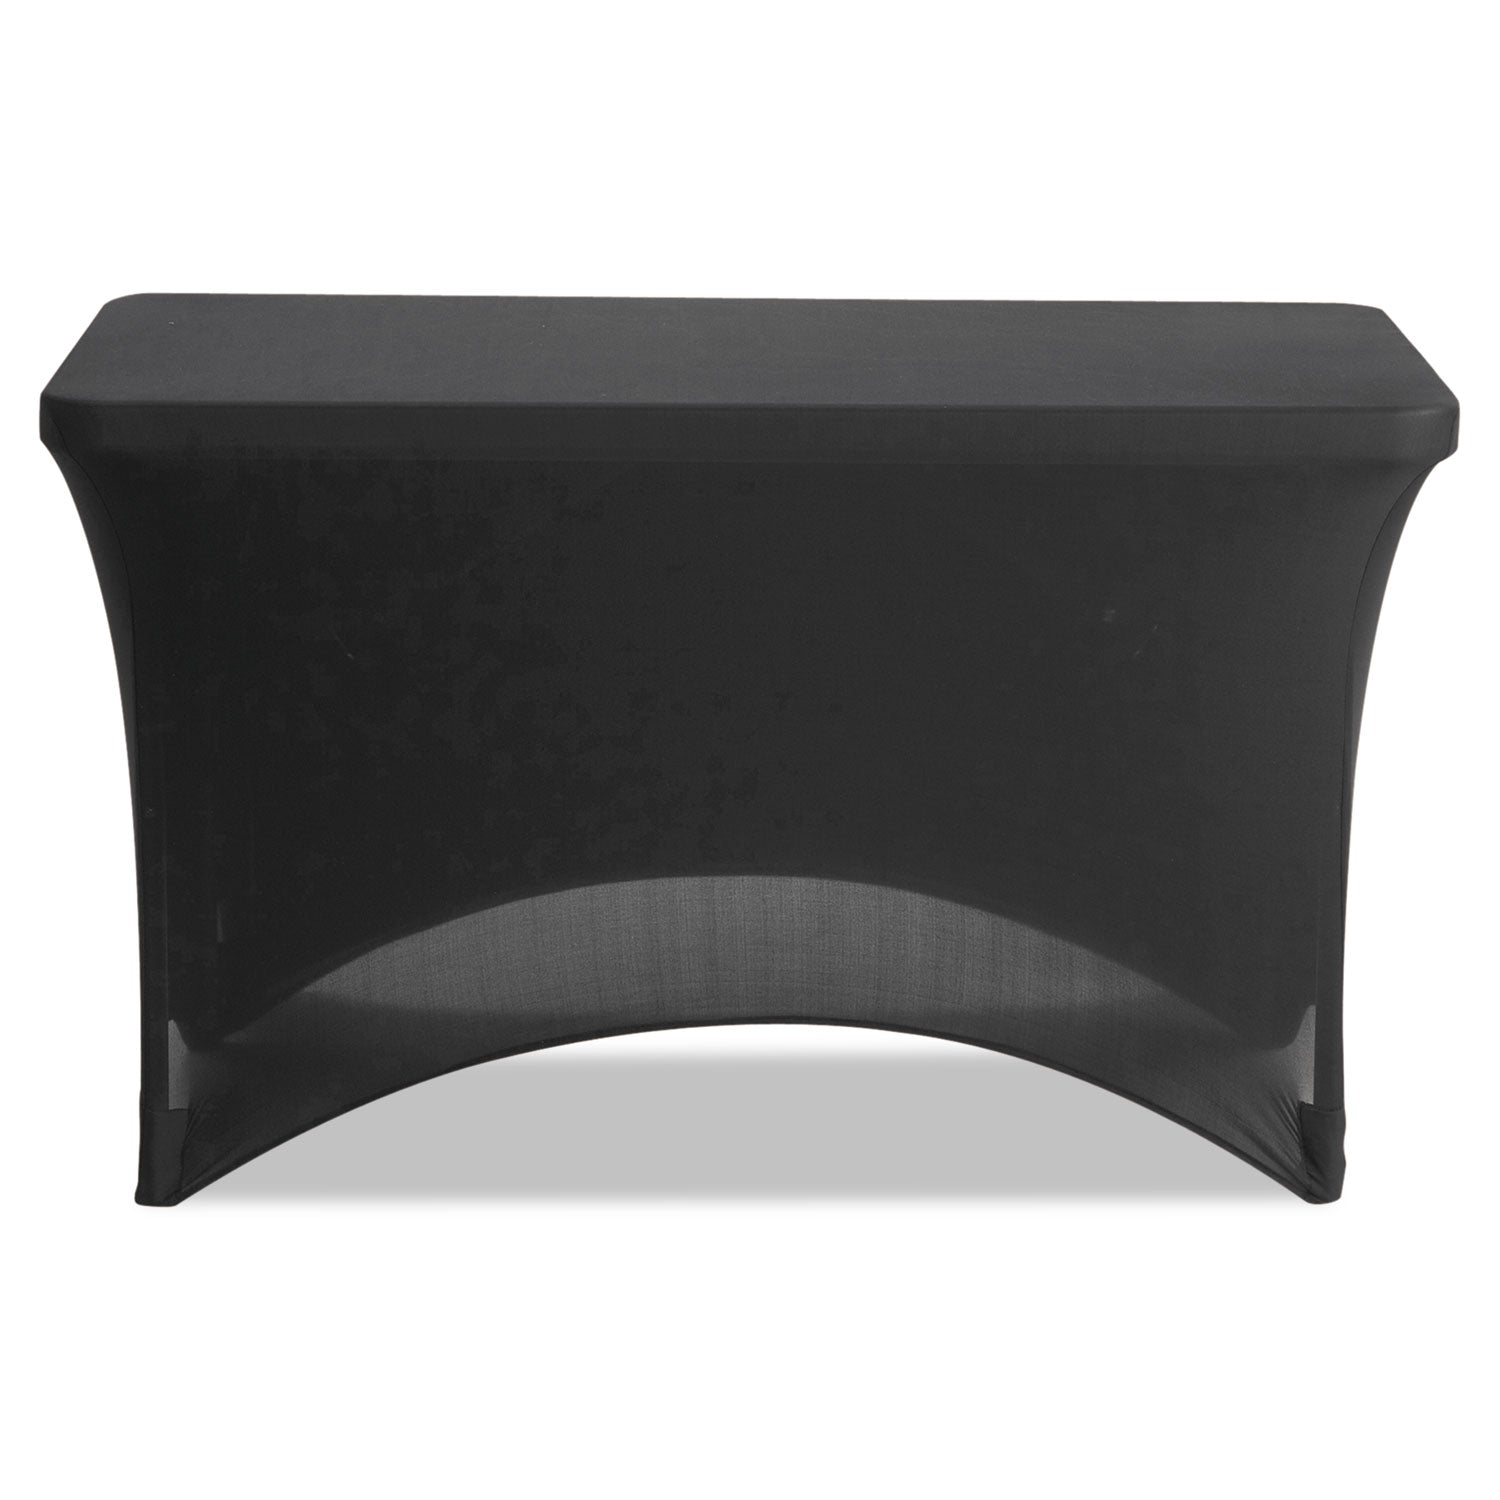 iGear Fabric Table Cover, Polyester/Spandex, 24" x 48", Black - 